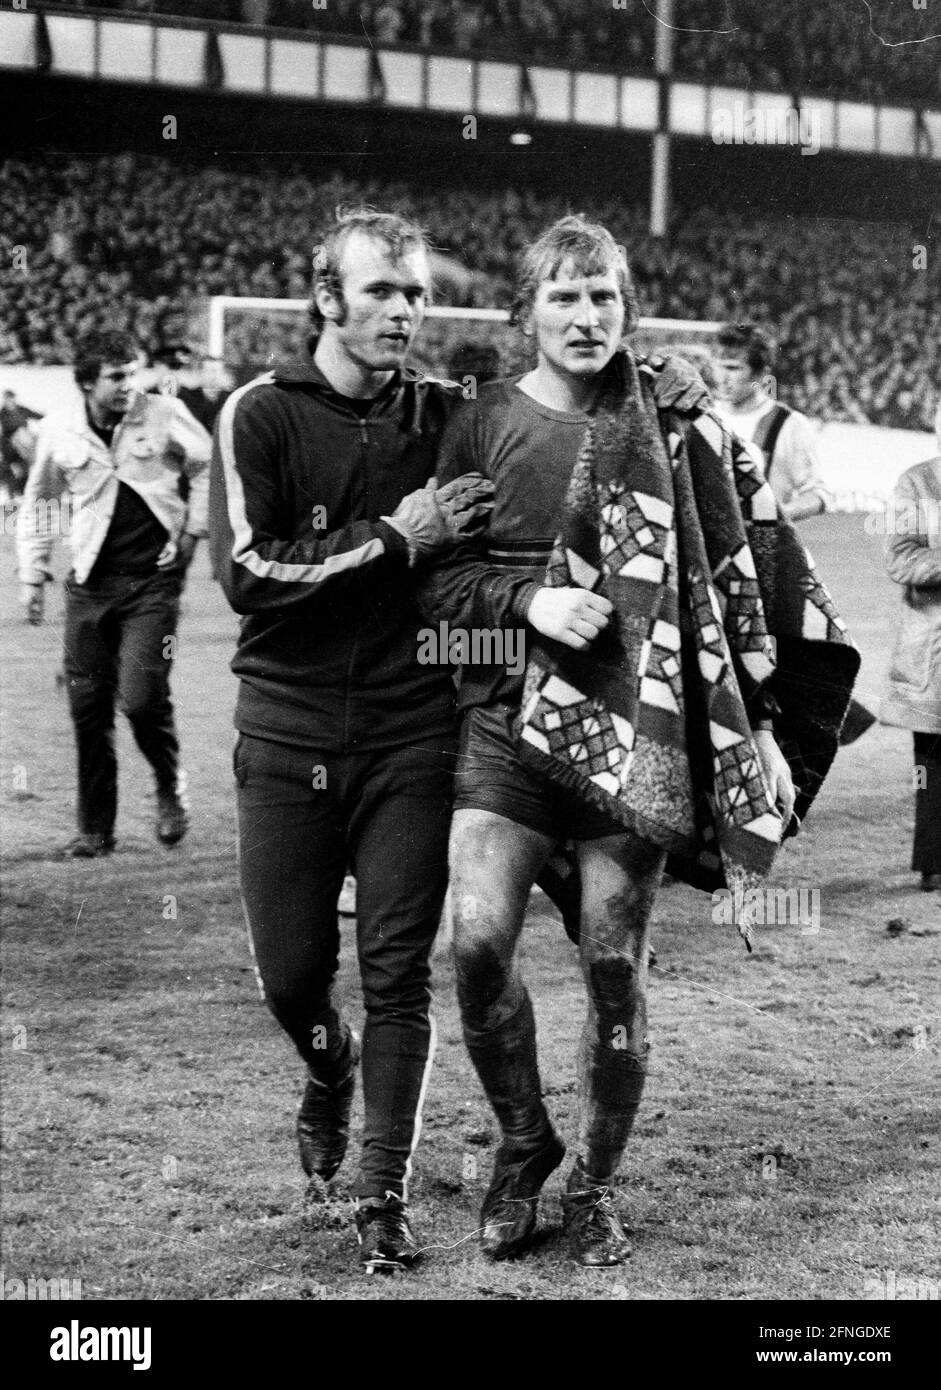 European Cup 1970/71 FC Everton - Borussia Mönchengladbach 04.11.1970 5:4 n.E. Wolfgang Kleff is consoled by substitute goalkeeper Bernd Schrage. For journalistic use only! Only for editorial use! [automated translation] Stock Photo